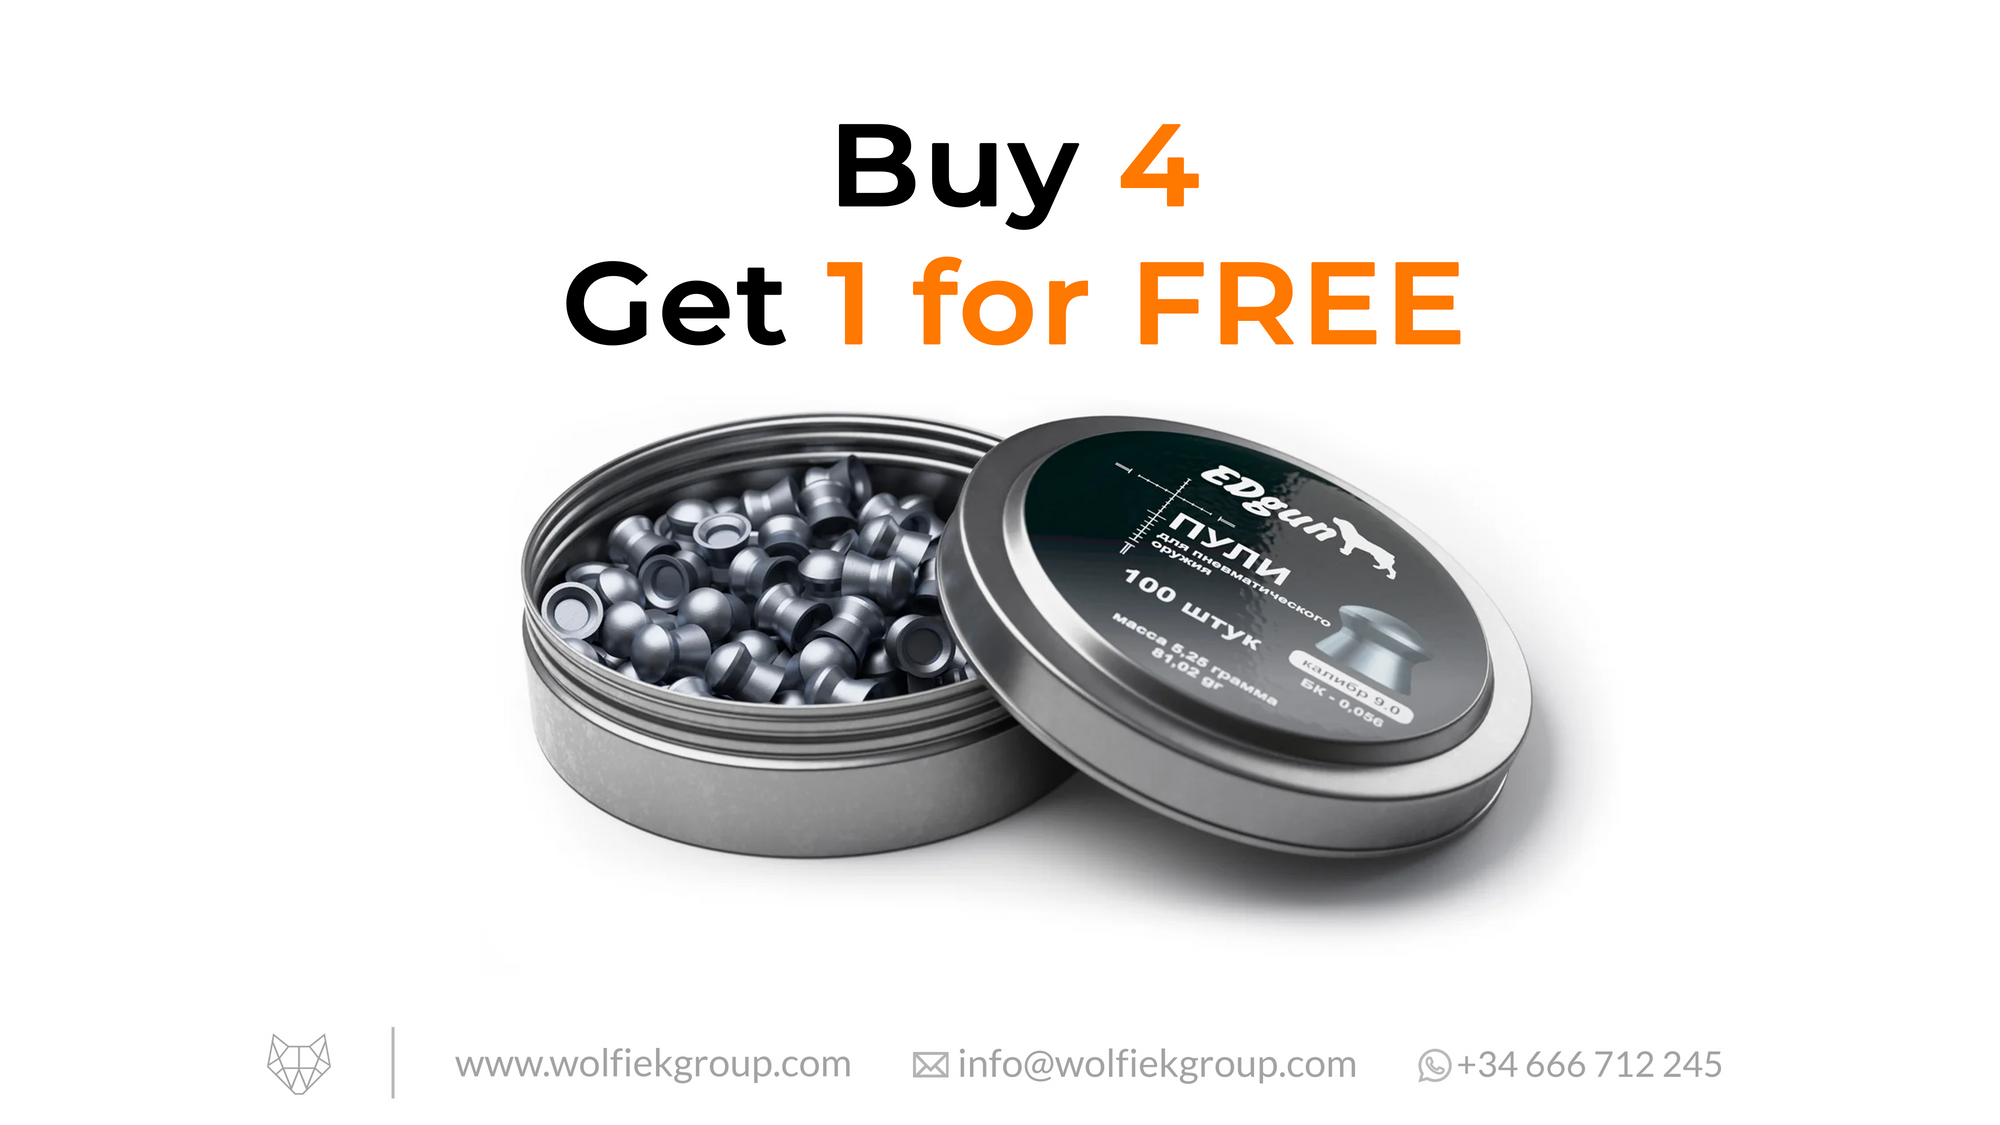 EDgun Premium Pellets with text buy 4 get 1 for free